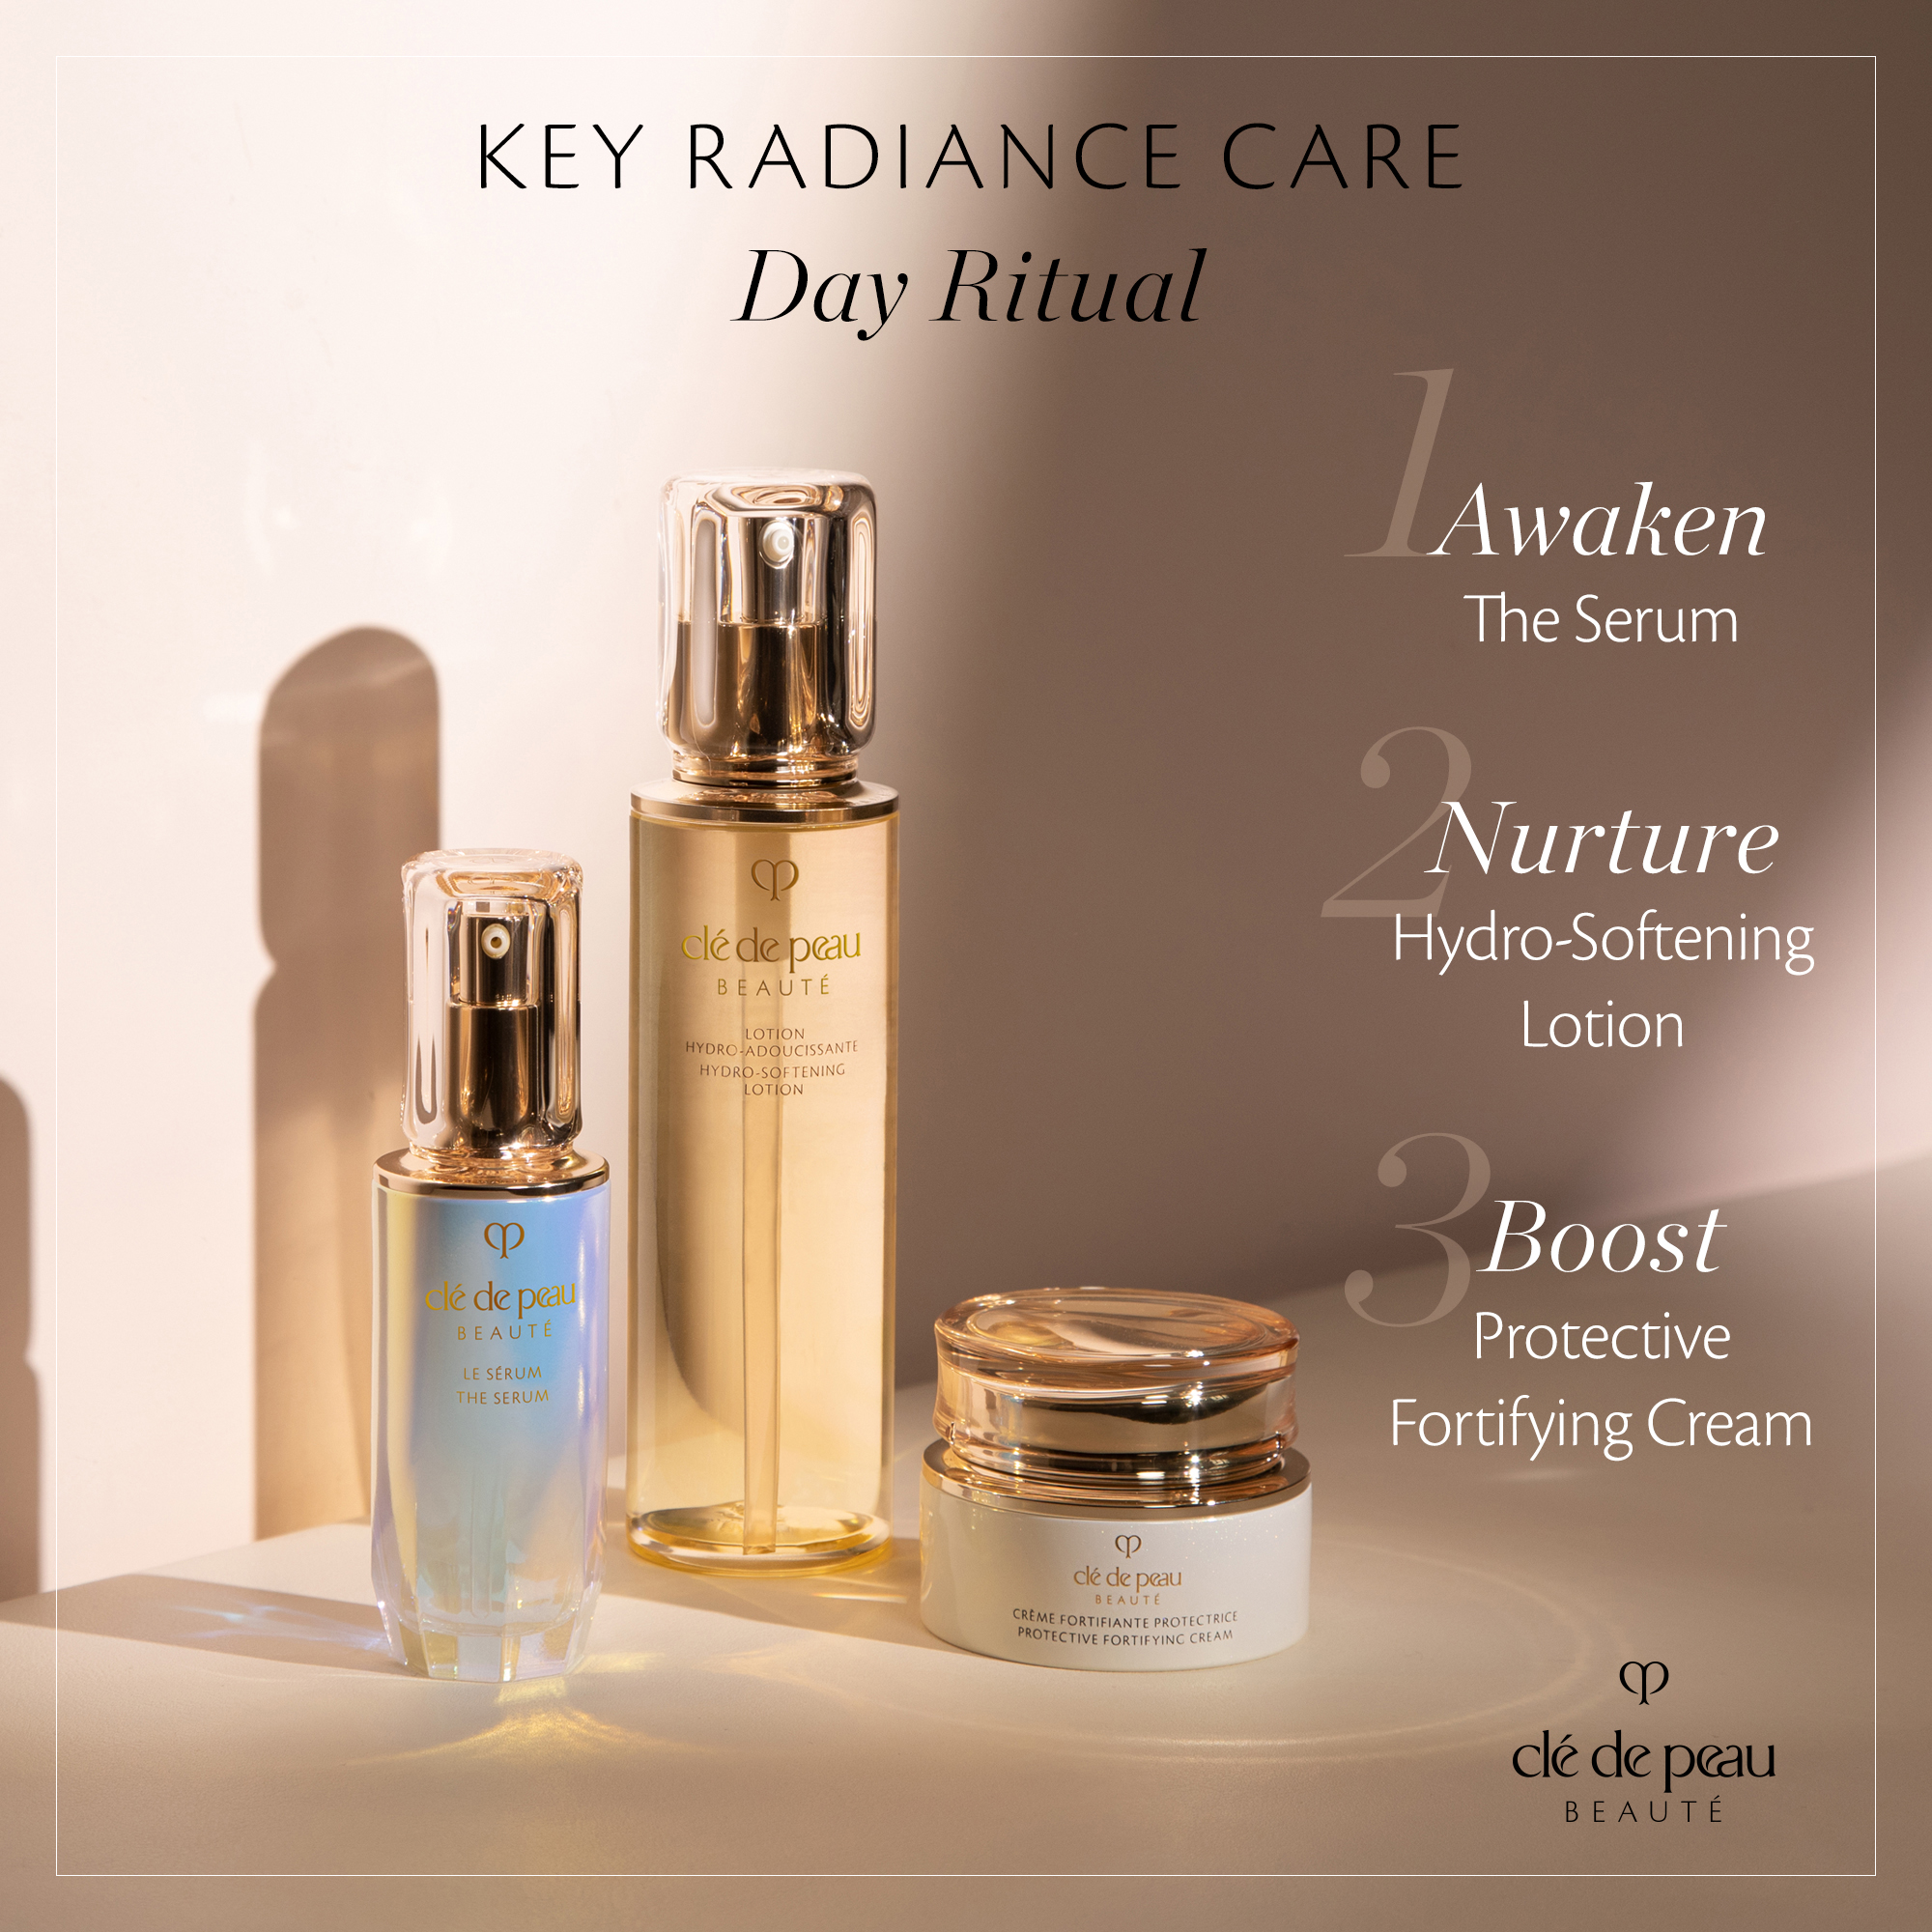 Key Radiance Care Day Ritual. 1. Awaken The serum, 2.Nurture Hydro-softening lotion, 3. Boost Protective Fortifying cream